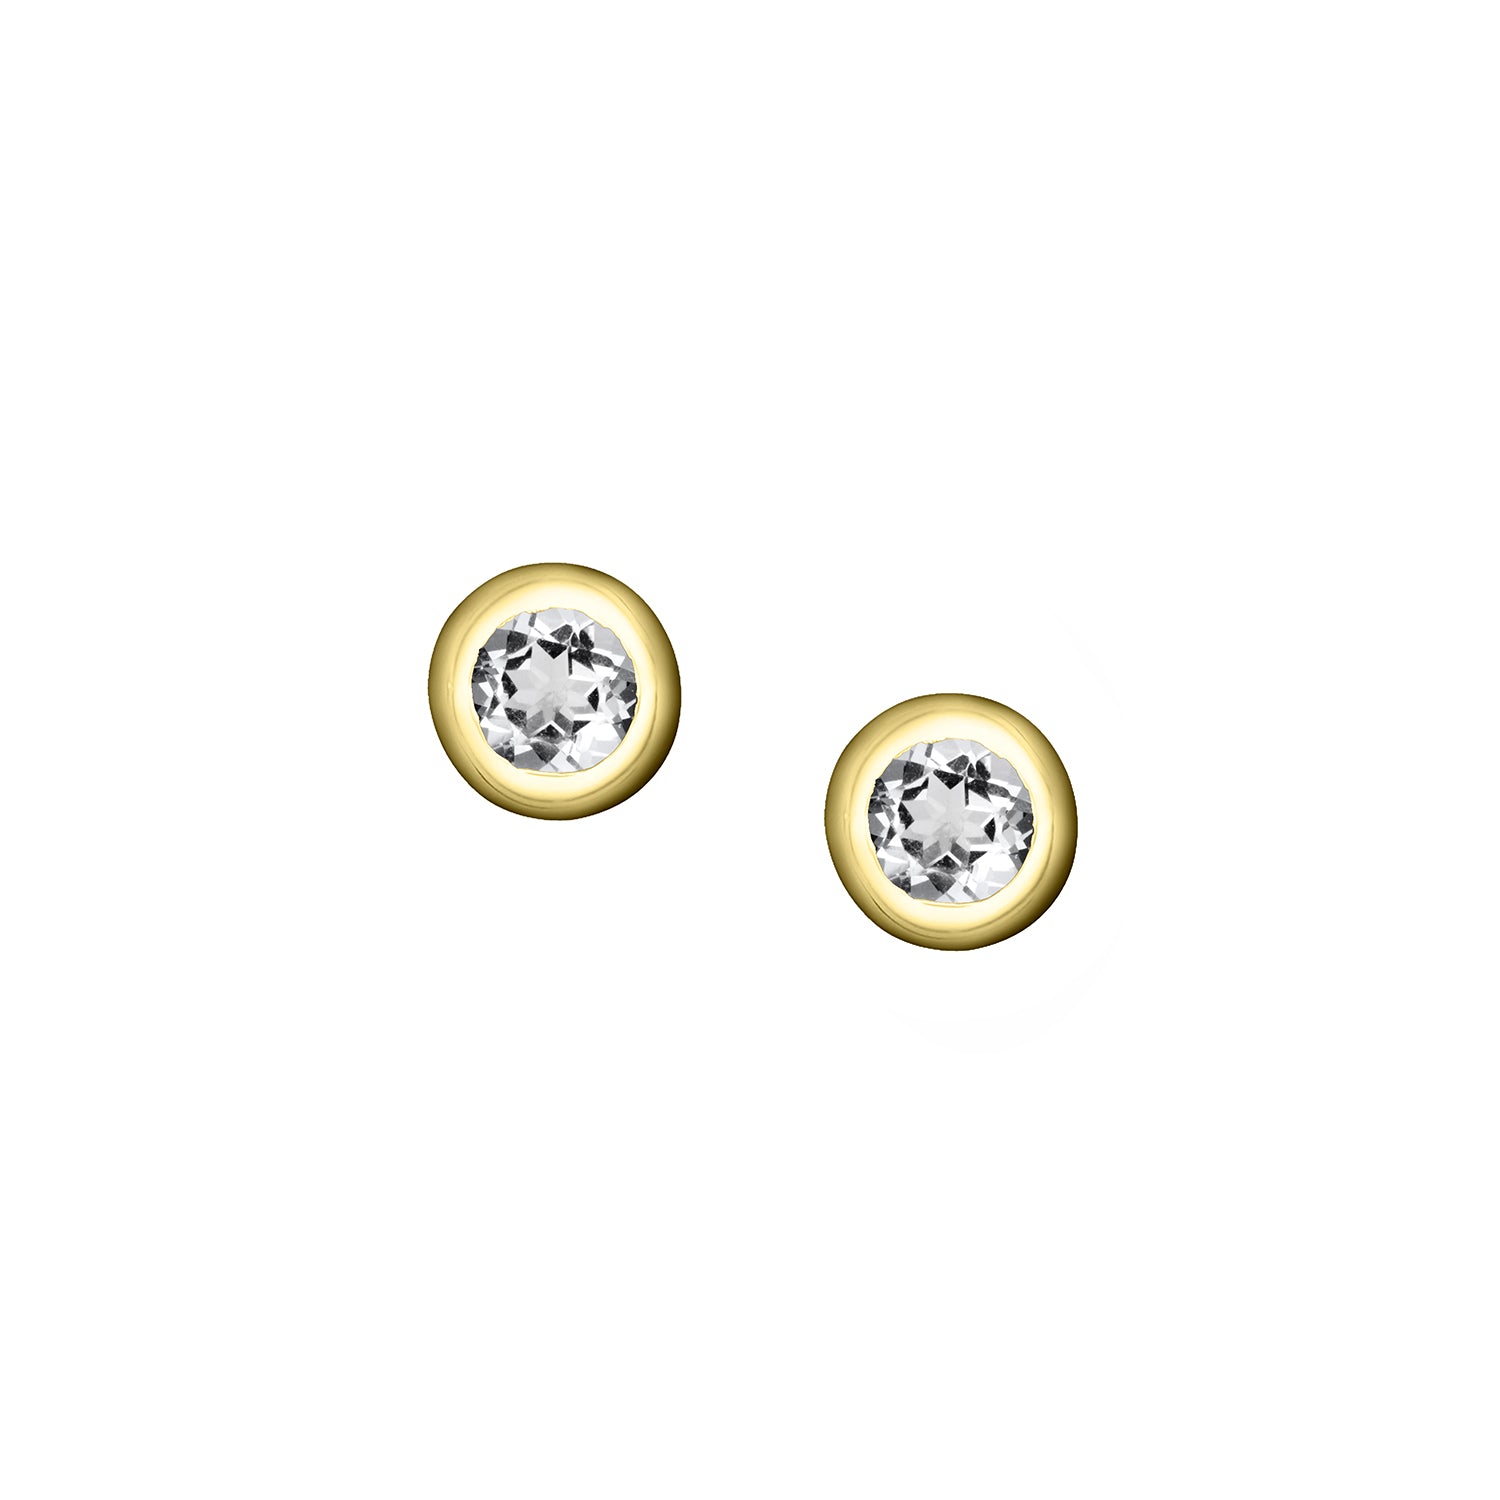 Polished Gold Vermeil Crescent Moon Birthstone Earrings - April / White Sapphire